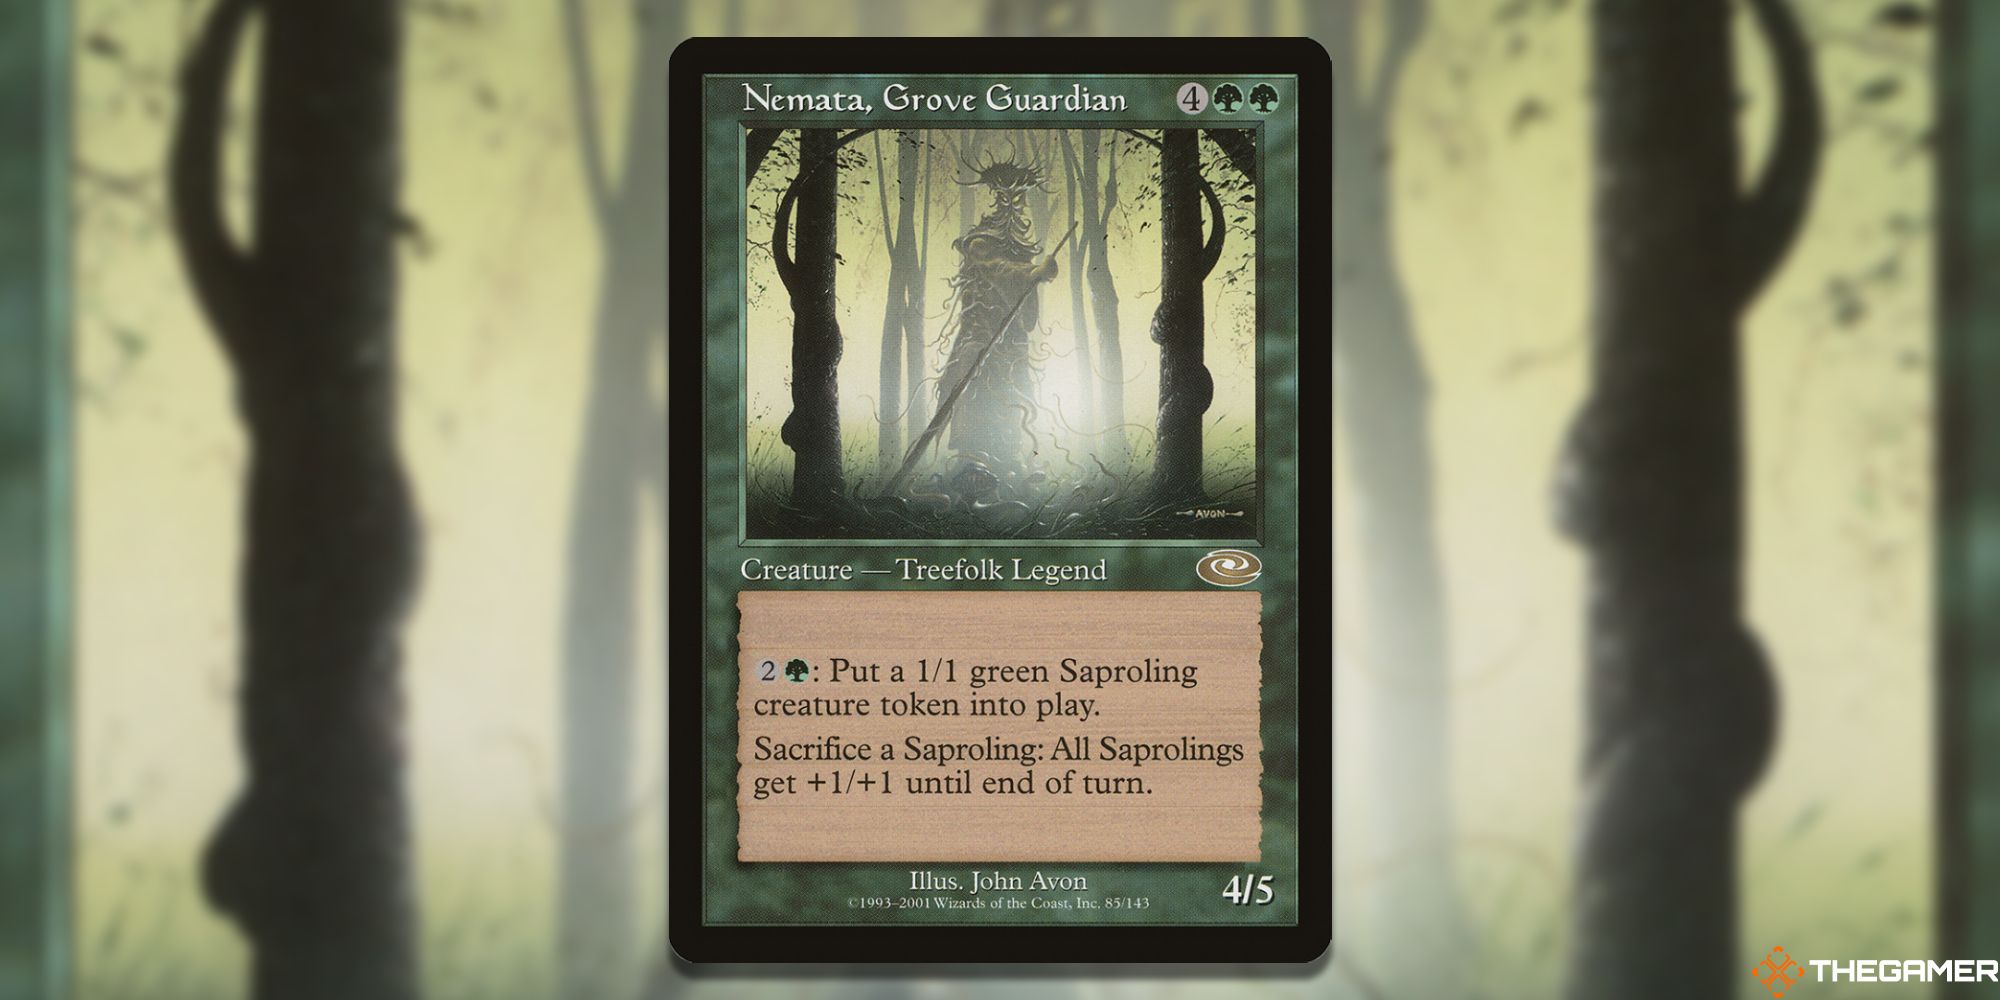 The card Nemata, Grove Guardian from Magic: The Gathering.